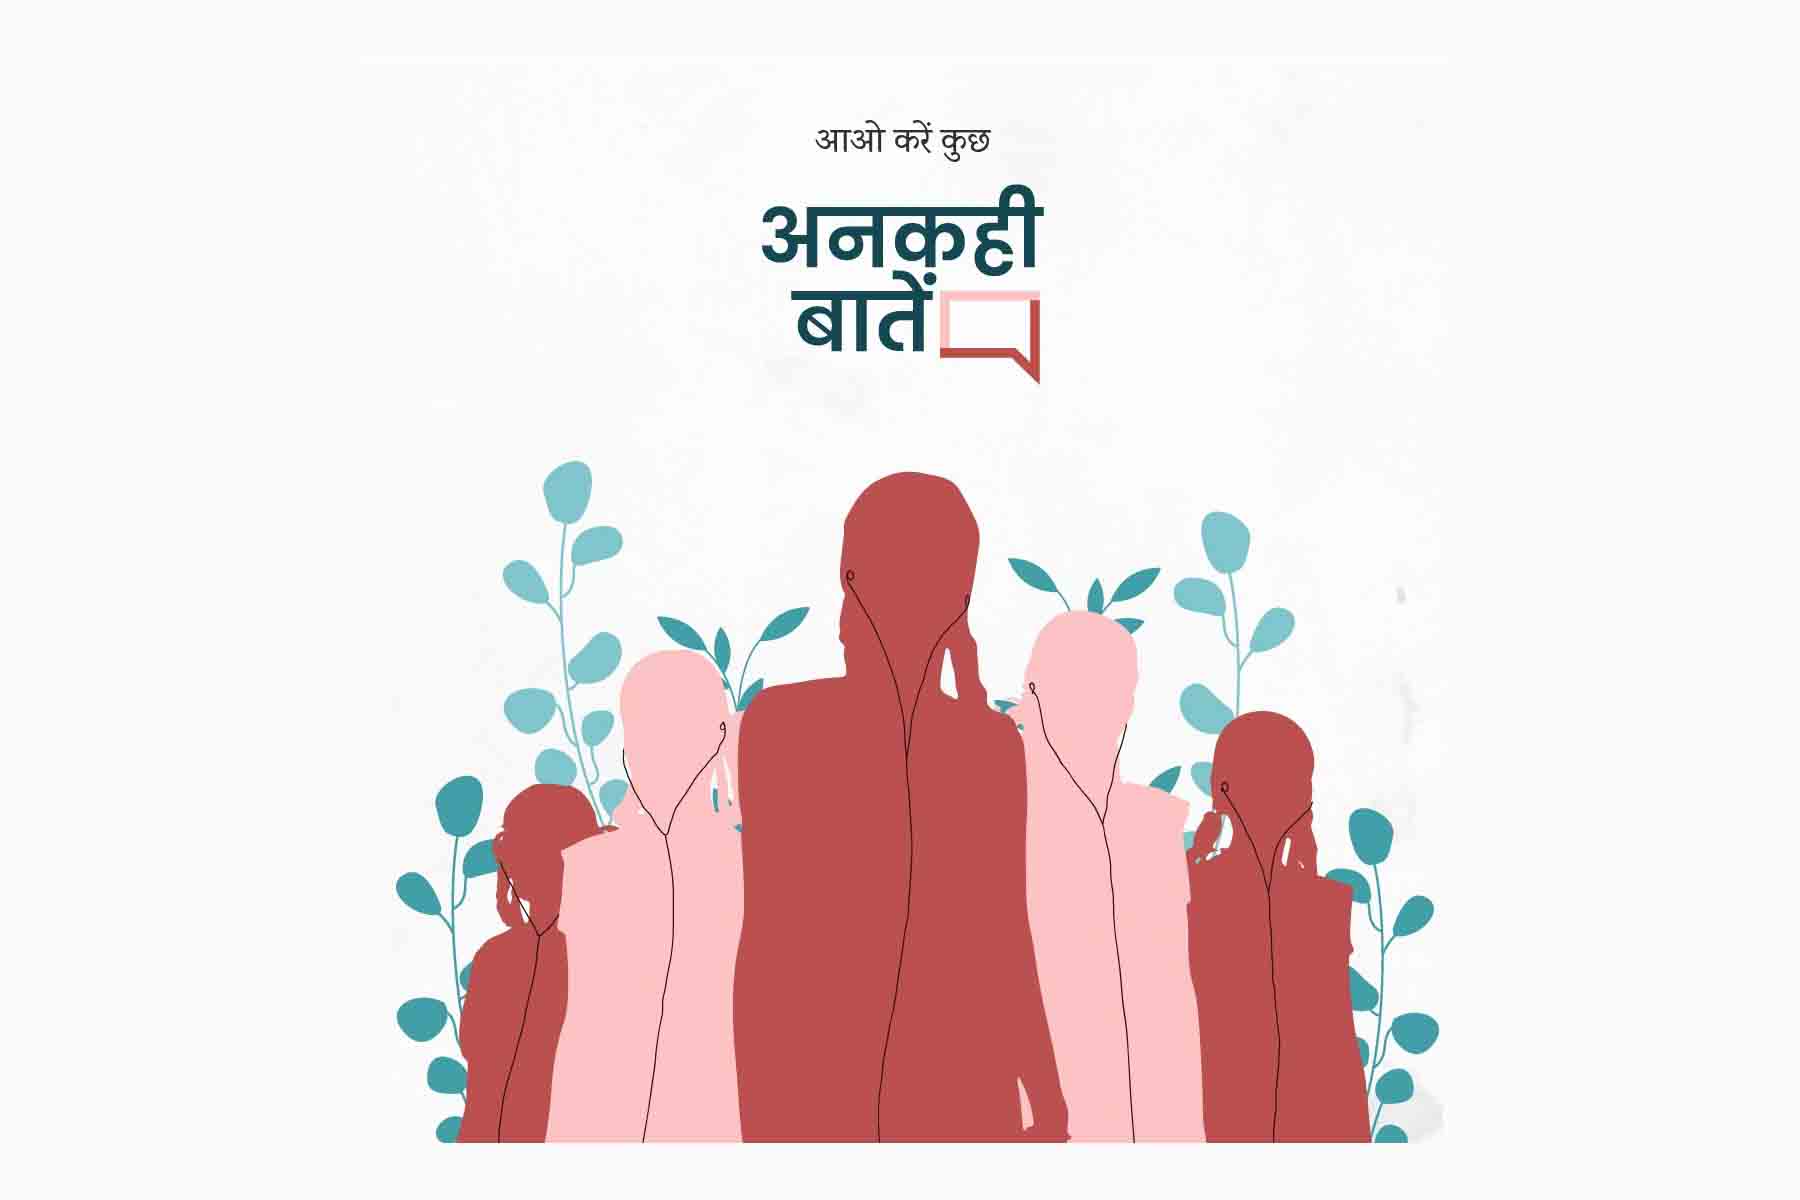 With this Groundbreaking Series Listen to the ‘Ankahee Baatein’ of Adolescent India Like Never Before